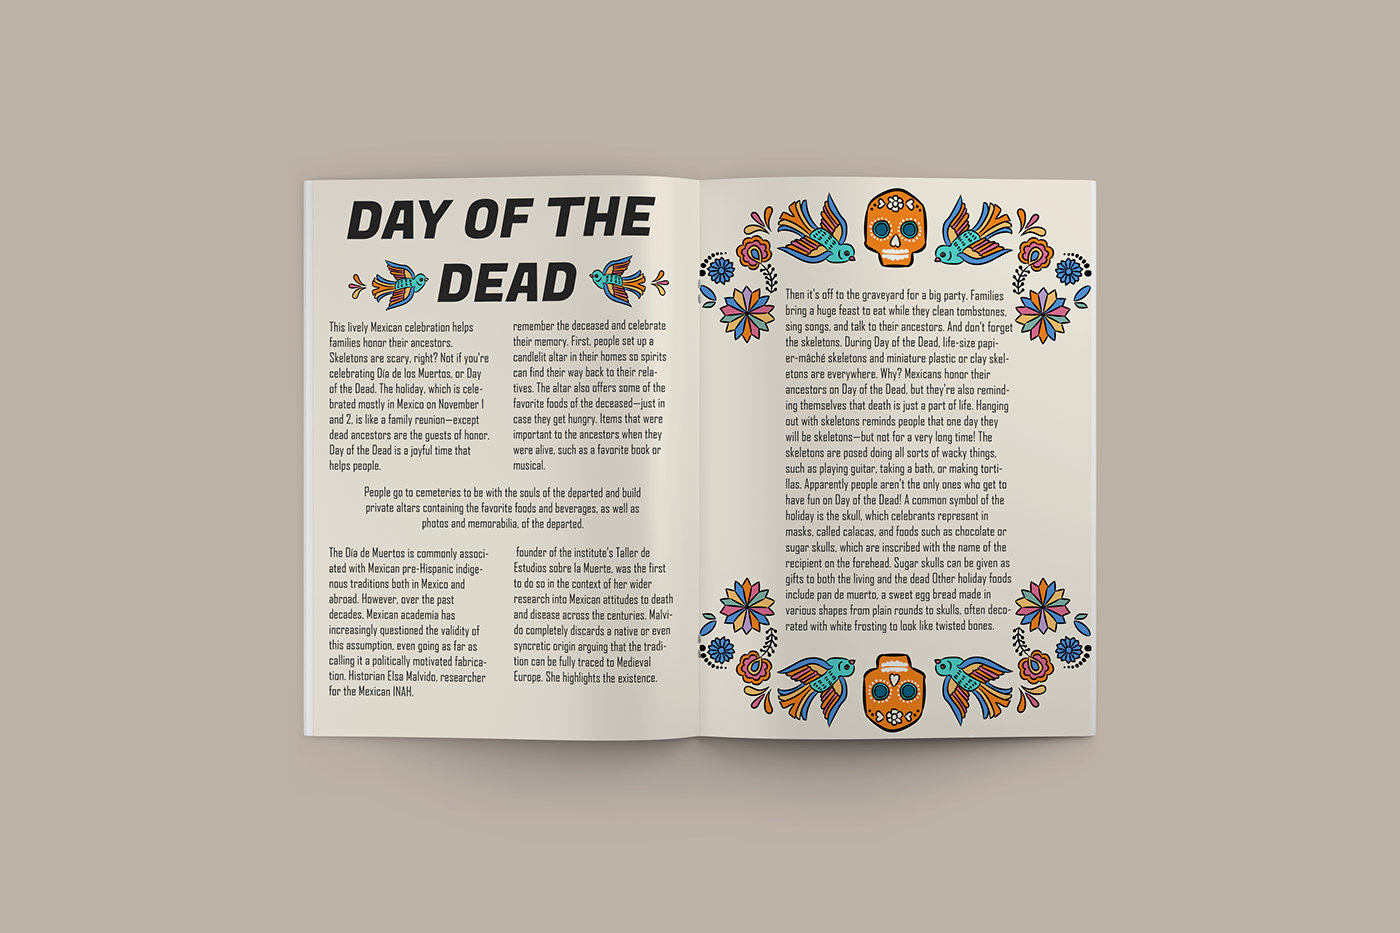 The day of dead